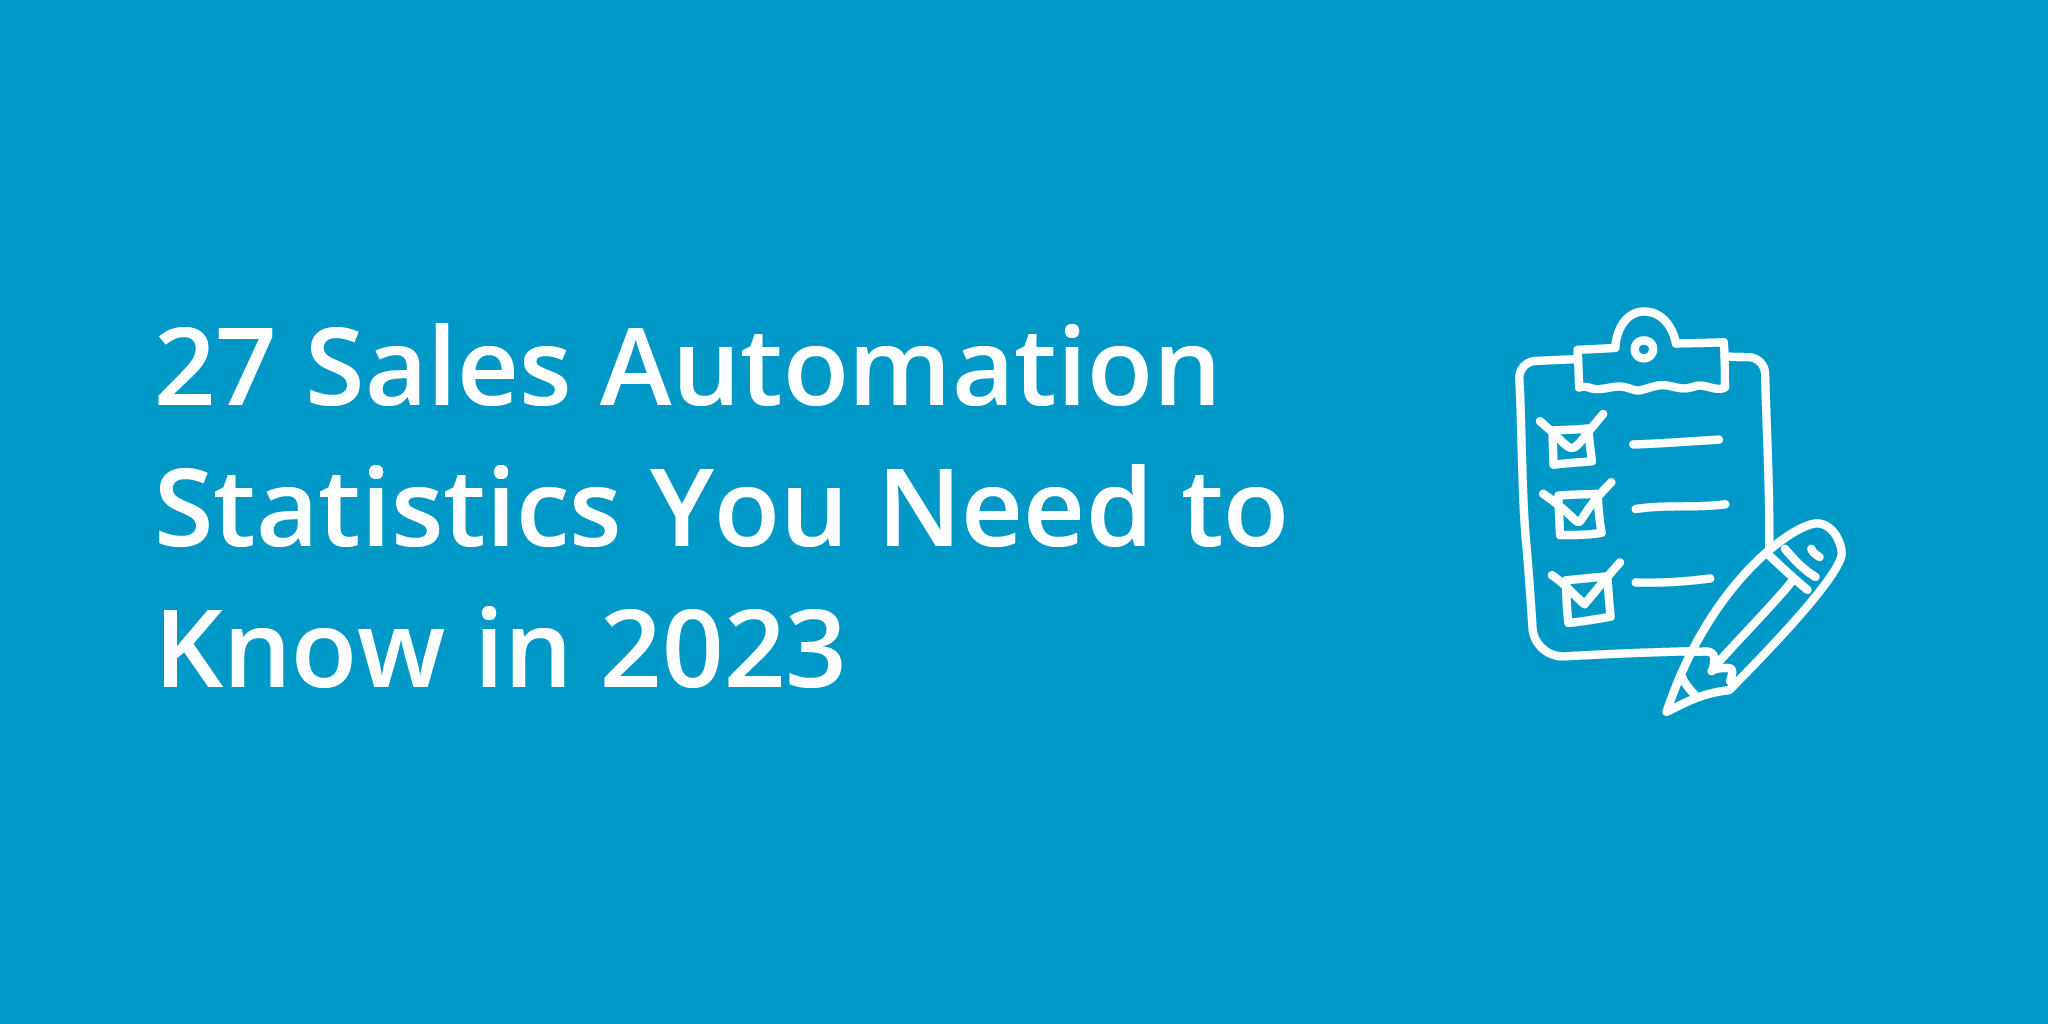 27 Sales Automation Statistics You Need to Know in 2023 | Telephones for business